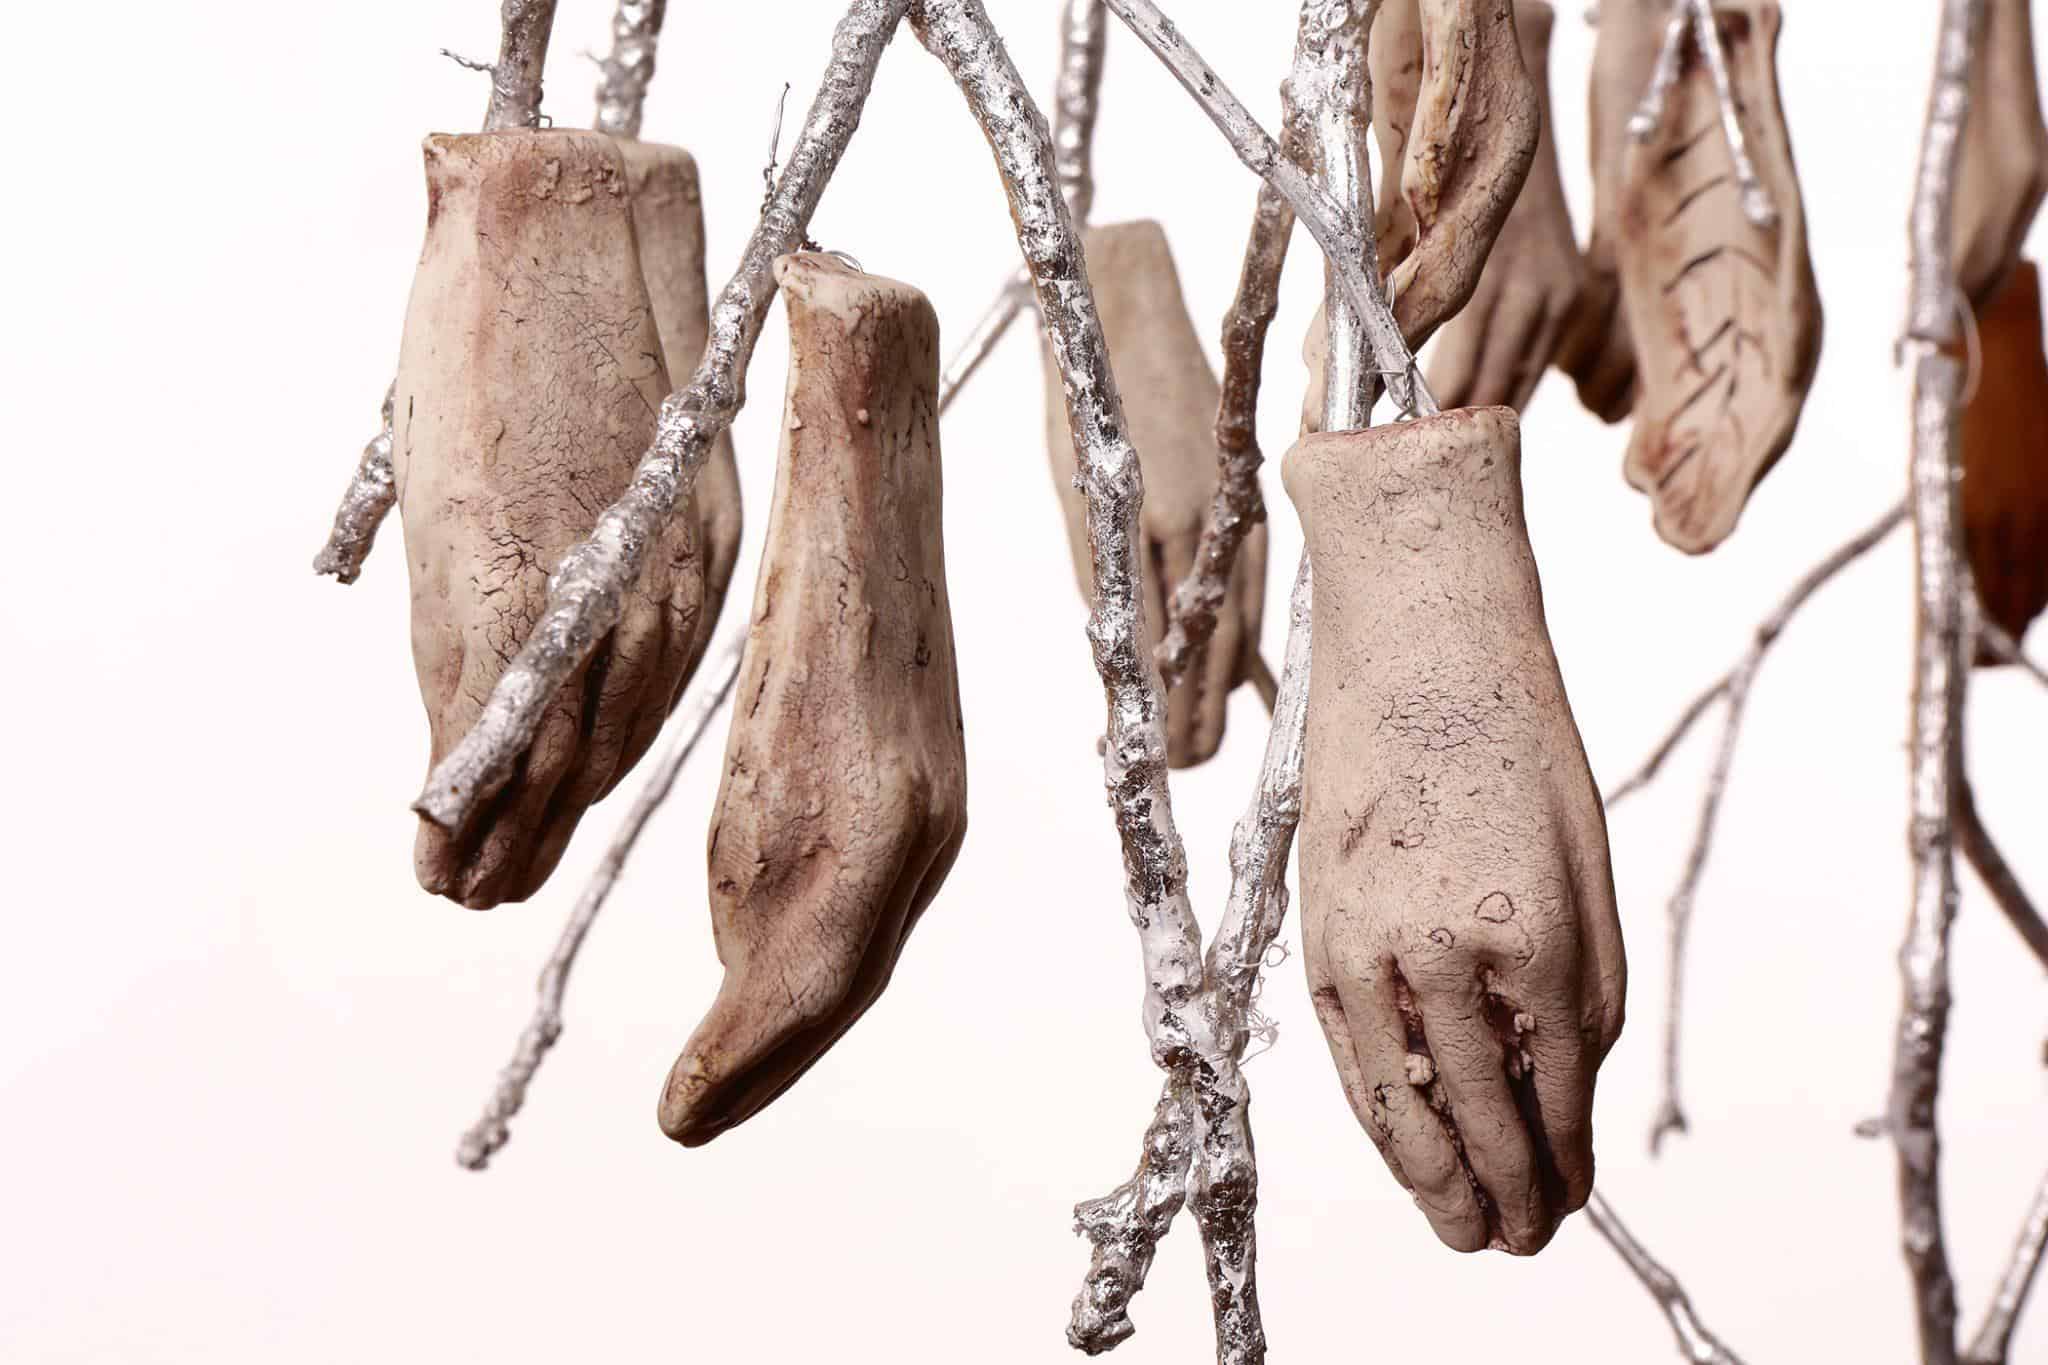 Jocelyn Braxton Armstrong, Our Hands in Your Hands (detail), 2018. Red clay, porcelain, engobe, oxide, branches, driftwood, paint, silver leaf, wire, 78” x 24” x 20”.